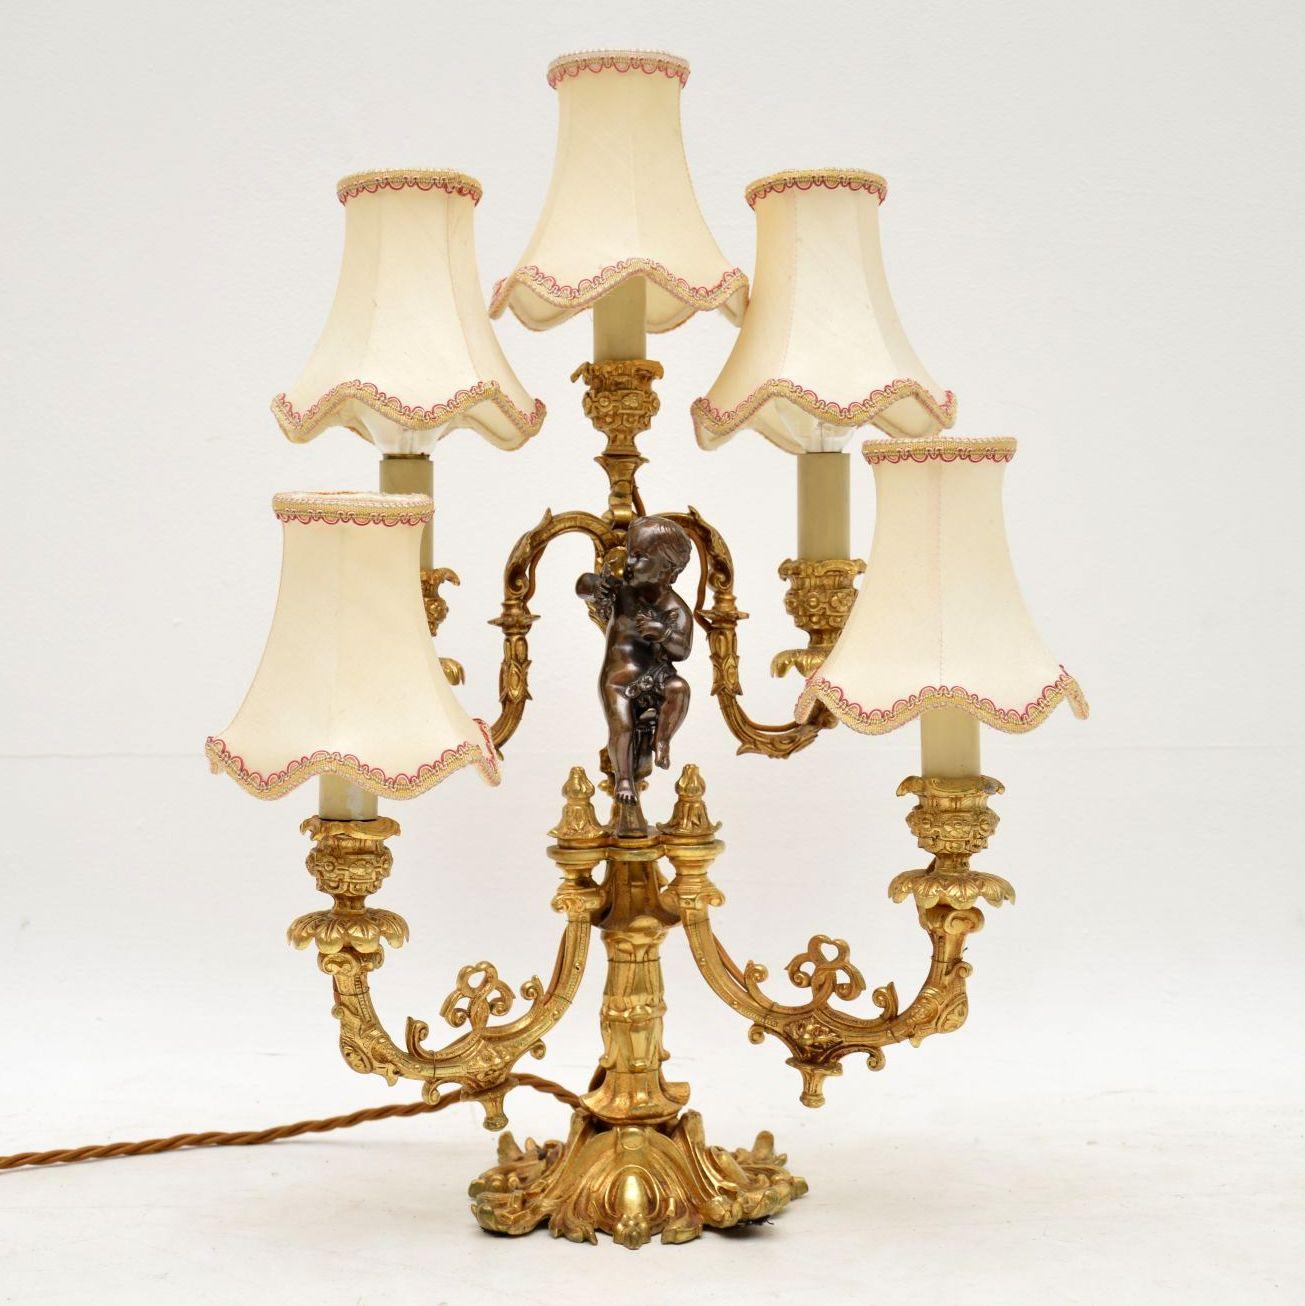 Very ornate antique French gilt metal and bronze candelabra lamp with five arms and lights attached. This lamp has been rewired and has the right shades which can clip onto the bulbs. It’s a matter of choice if you want to use the shades or not and